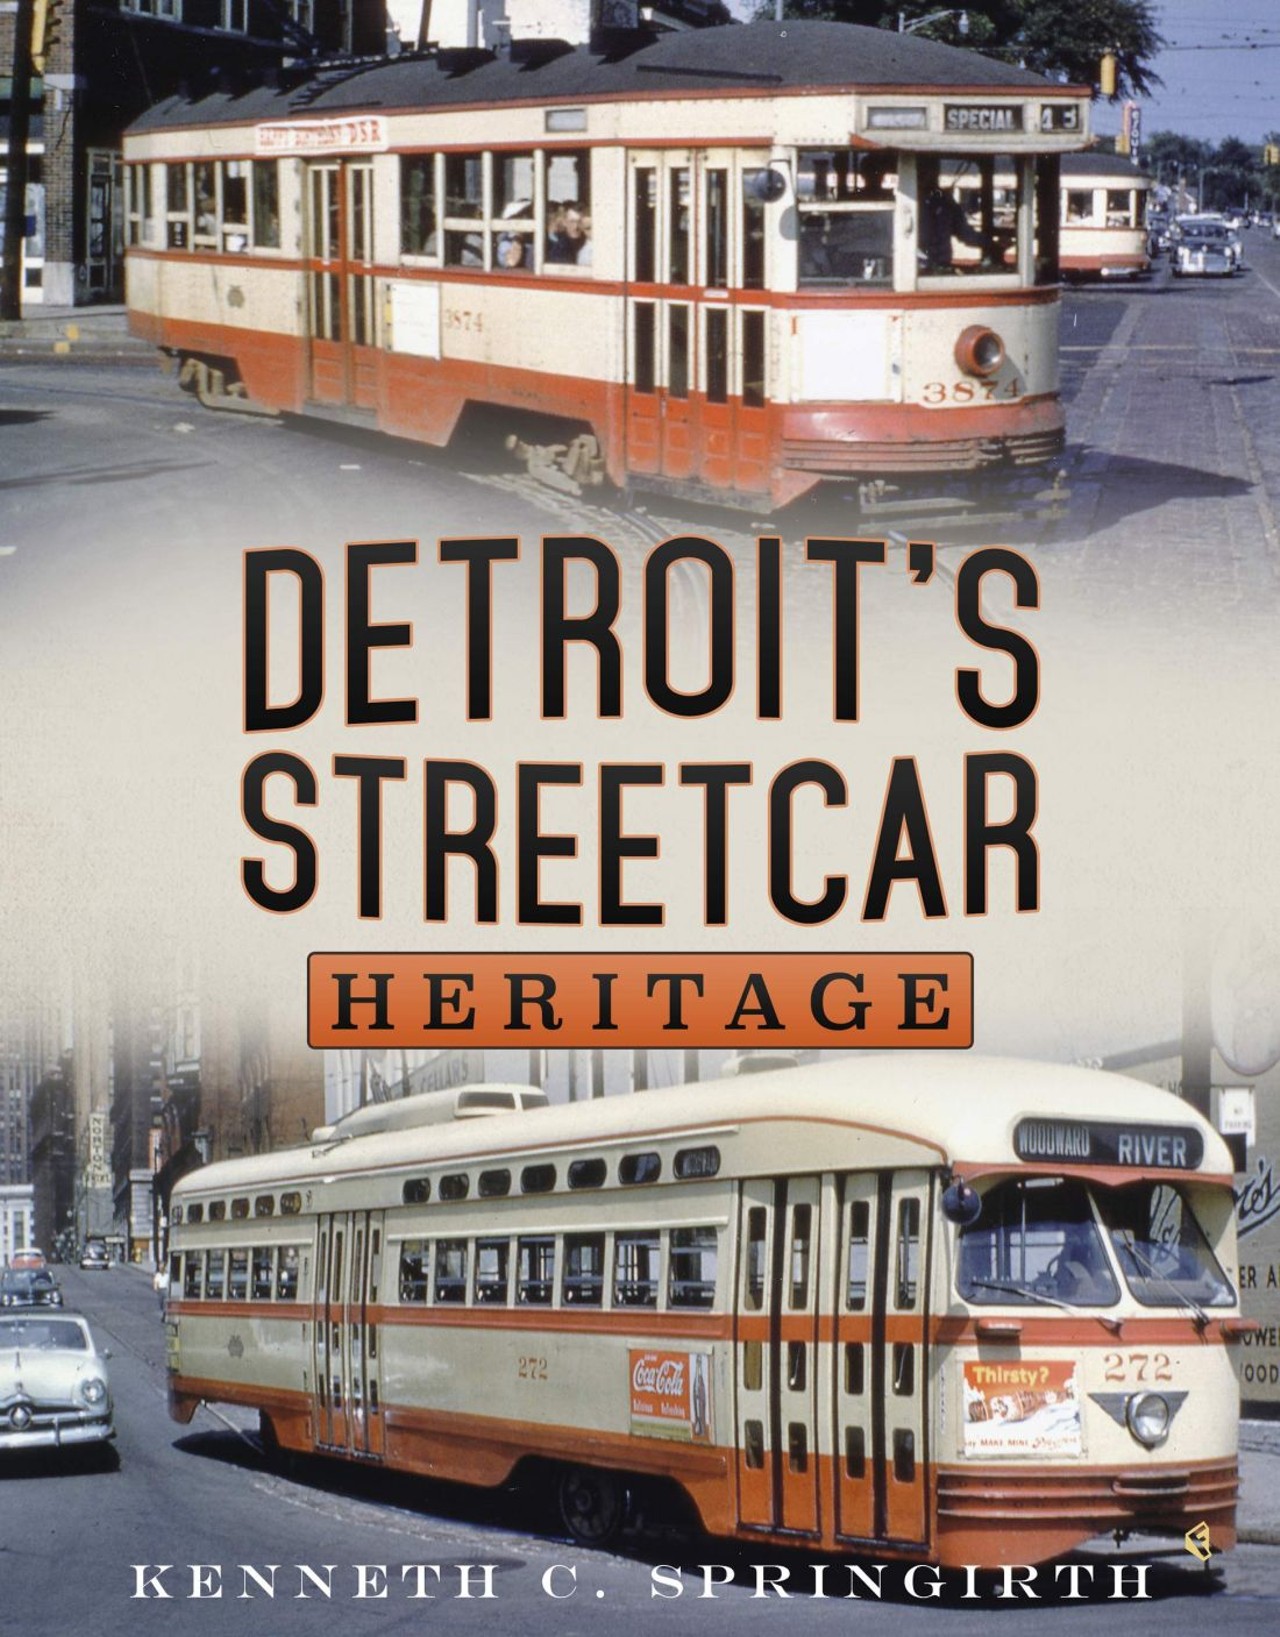 Detroit&#146;s Streetcar Heritage
Before there was the QLine, Detroit had a network of streetcars, and there is perhaps no one better to detail this history than Kenneth Springirth, who comes from a lineage of streetcar operators. Springirth imparts knowledge of an interesting and often overlooked part of Detroit&#146;s transit history through photos and captions. Concise write-ups also give readers additional context, helping to form a complete picture of the history of streetcars in Detroit.